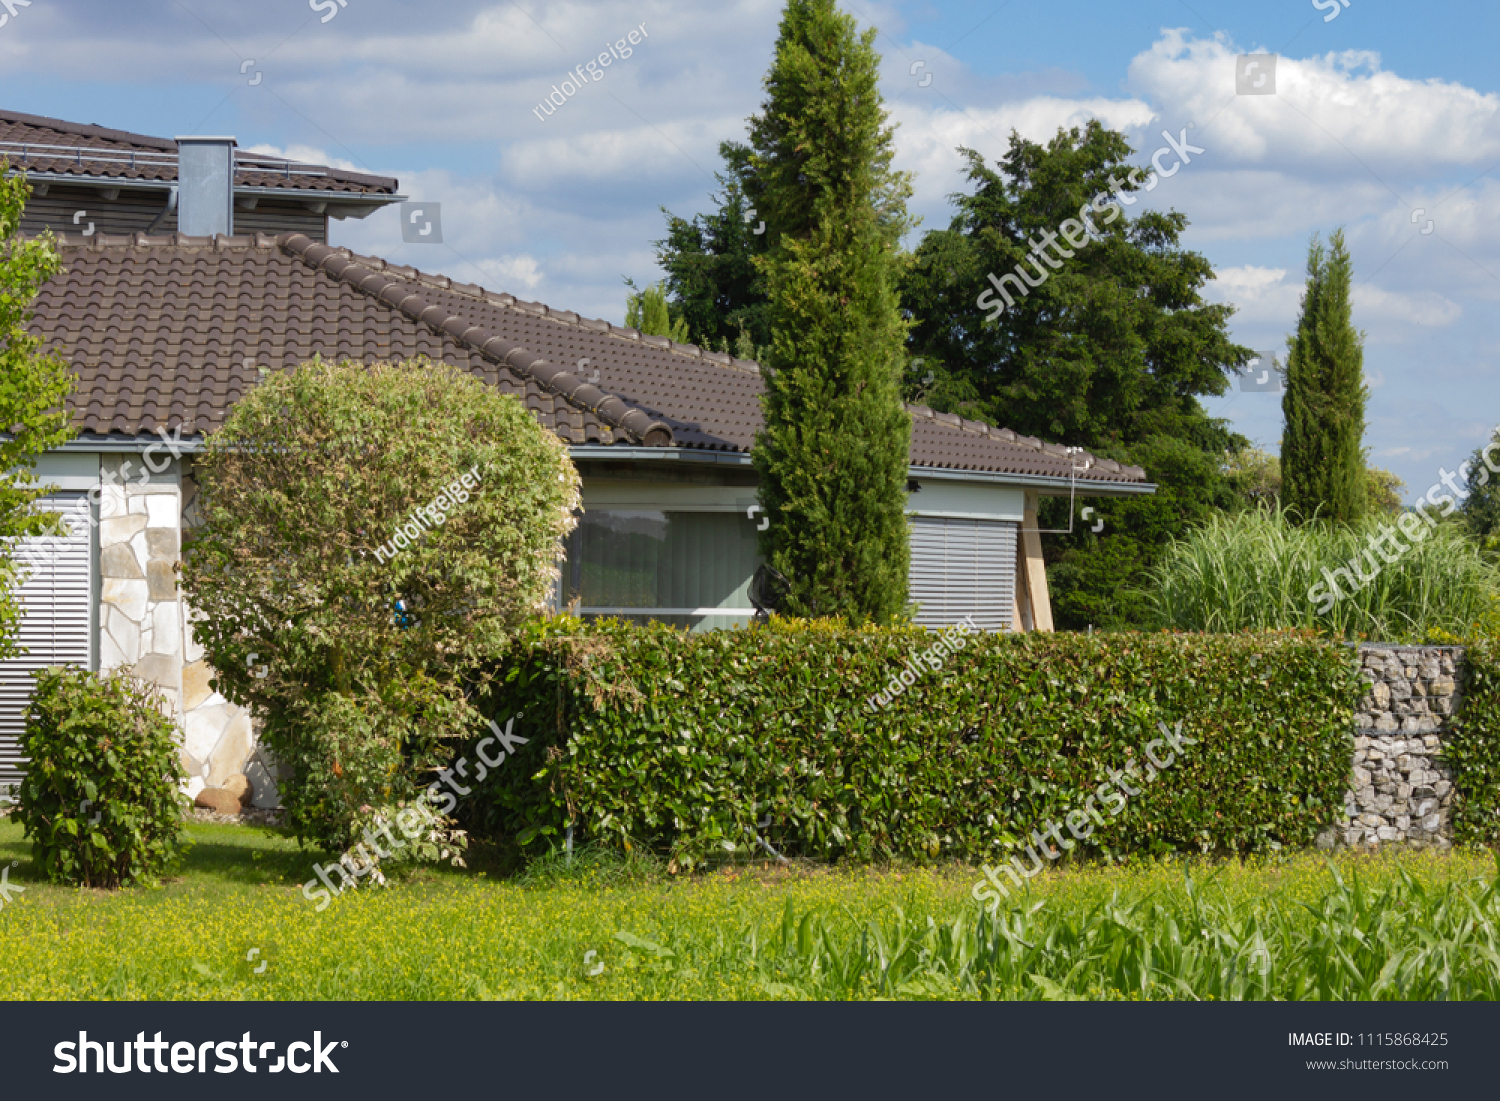 house of rural village on horizon under blue sky near corn field in south germany countryside #1115868425